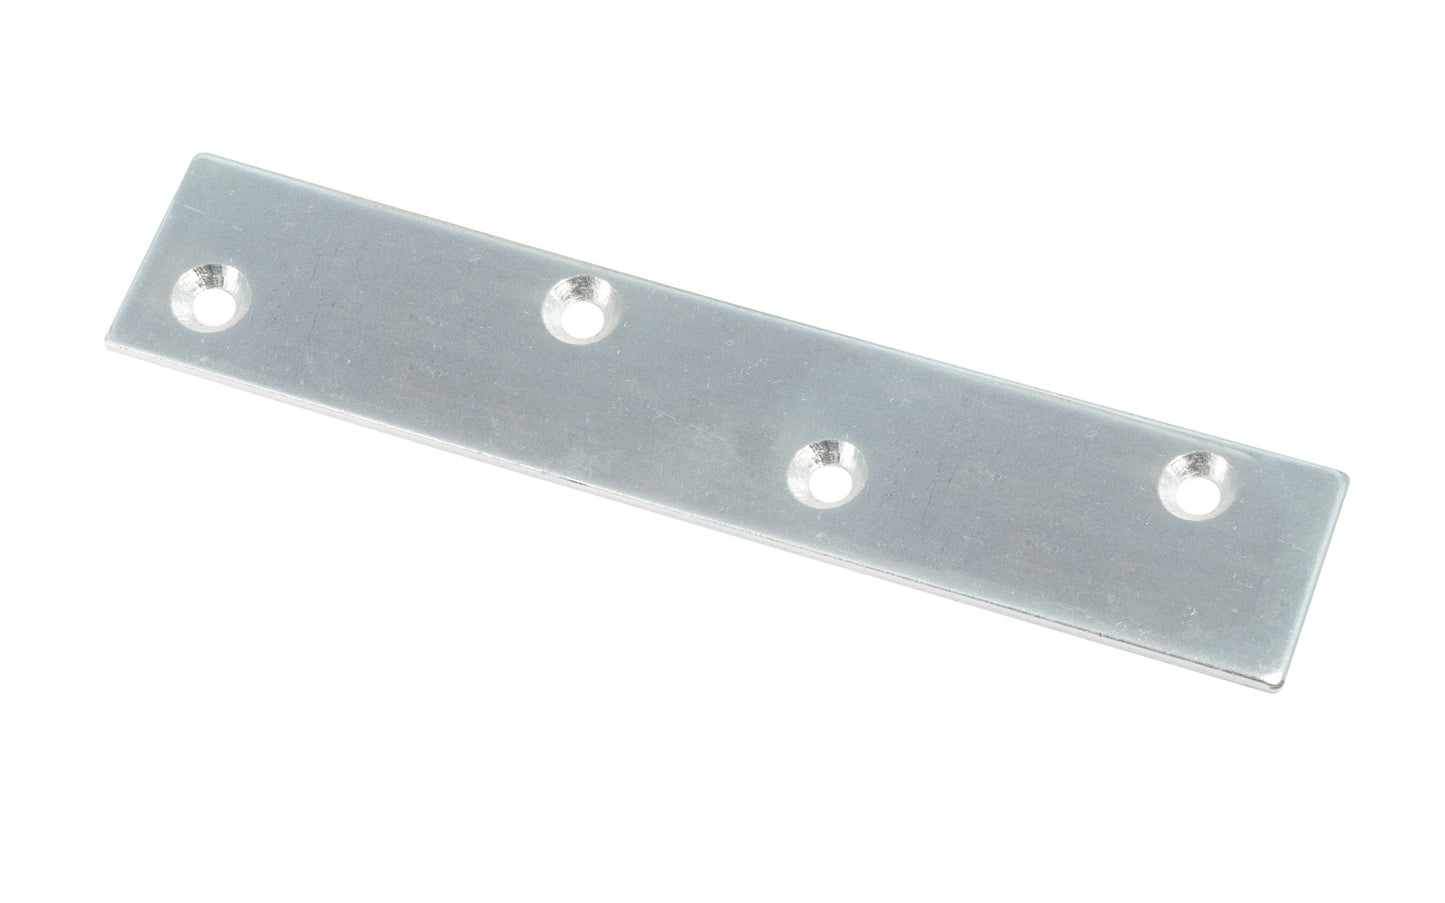 These flat mending plate irons are designed for furniture, cabinets, shelving support, etc. Allows for quick & easy repair of items in the workshop, home, & other applications. Made of steel material with a zinc plated finish. Countersunk holes. Sold as singles, or bulk box of (20) mending braces. 5"  long size.  Screws not included.